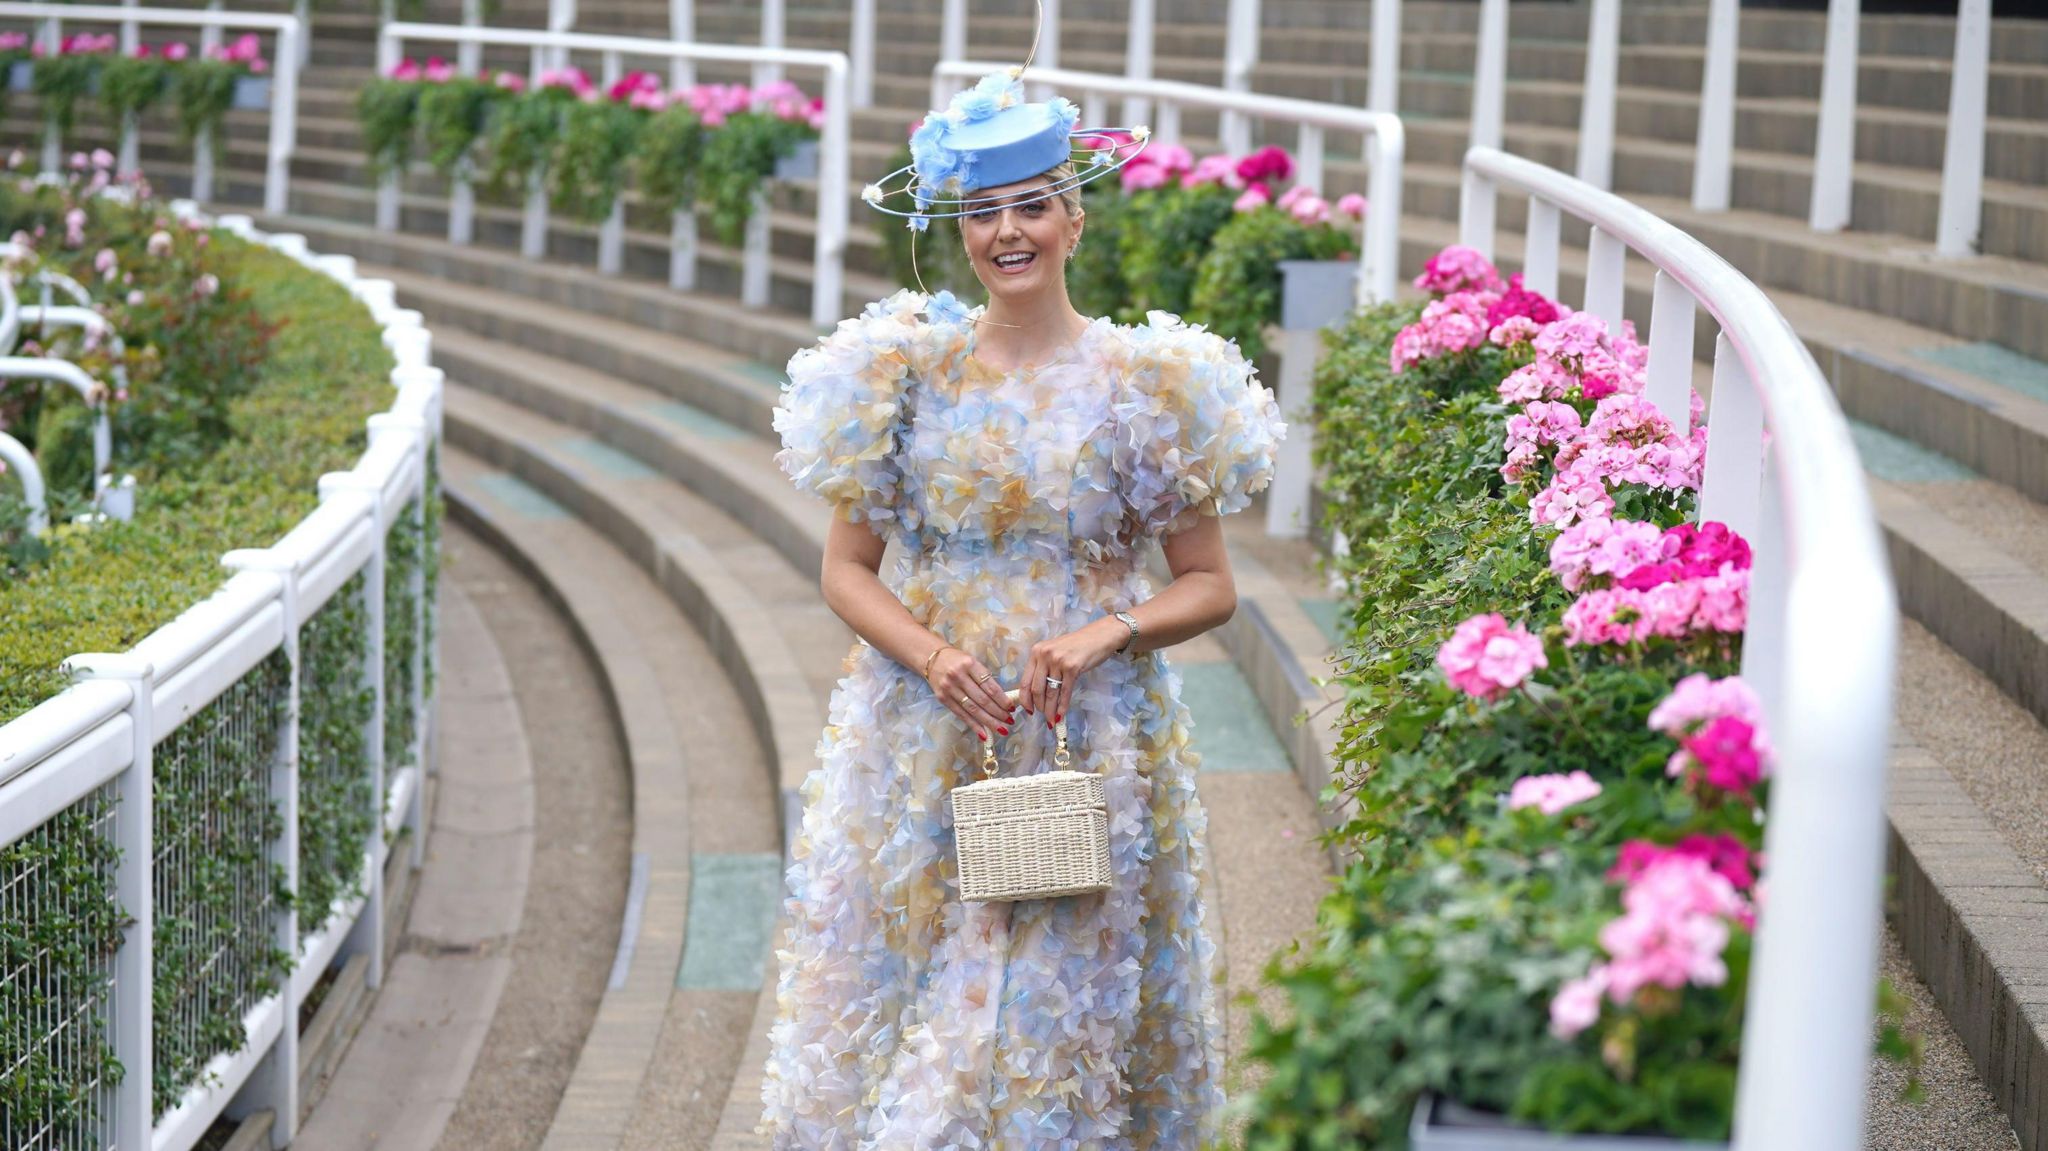 Charly Blackburn wears a ruffled short sleeved, long floral light blue dress and pale blue hat